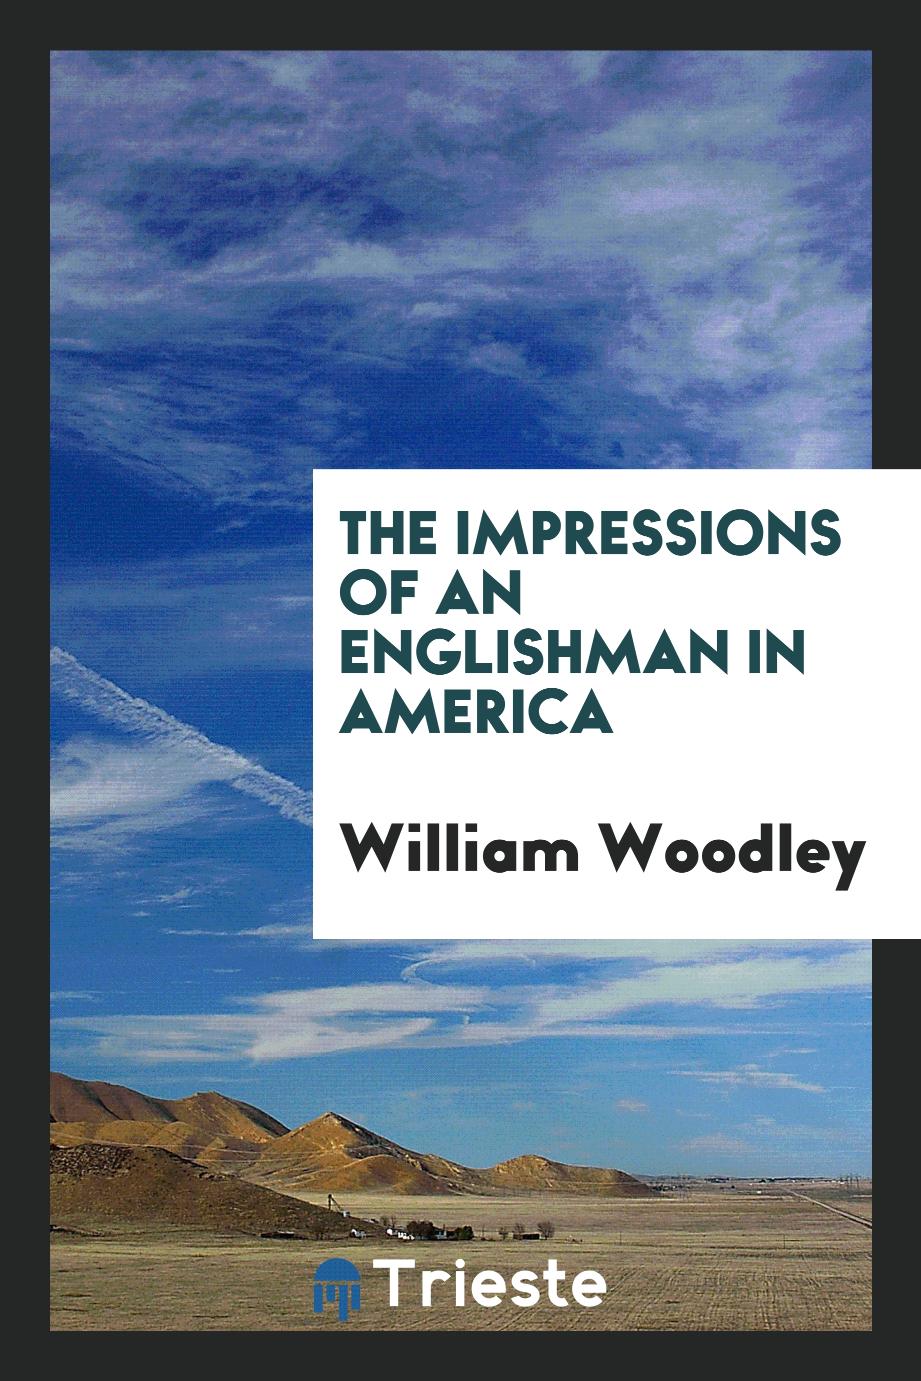 The impressions of an Englishman in America